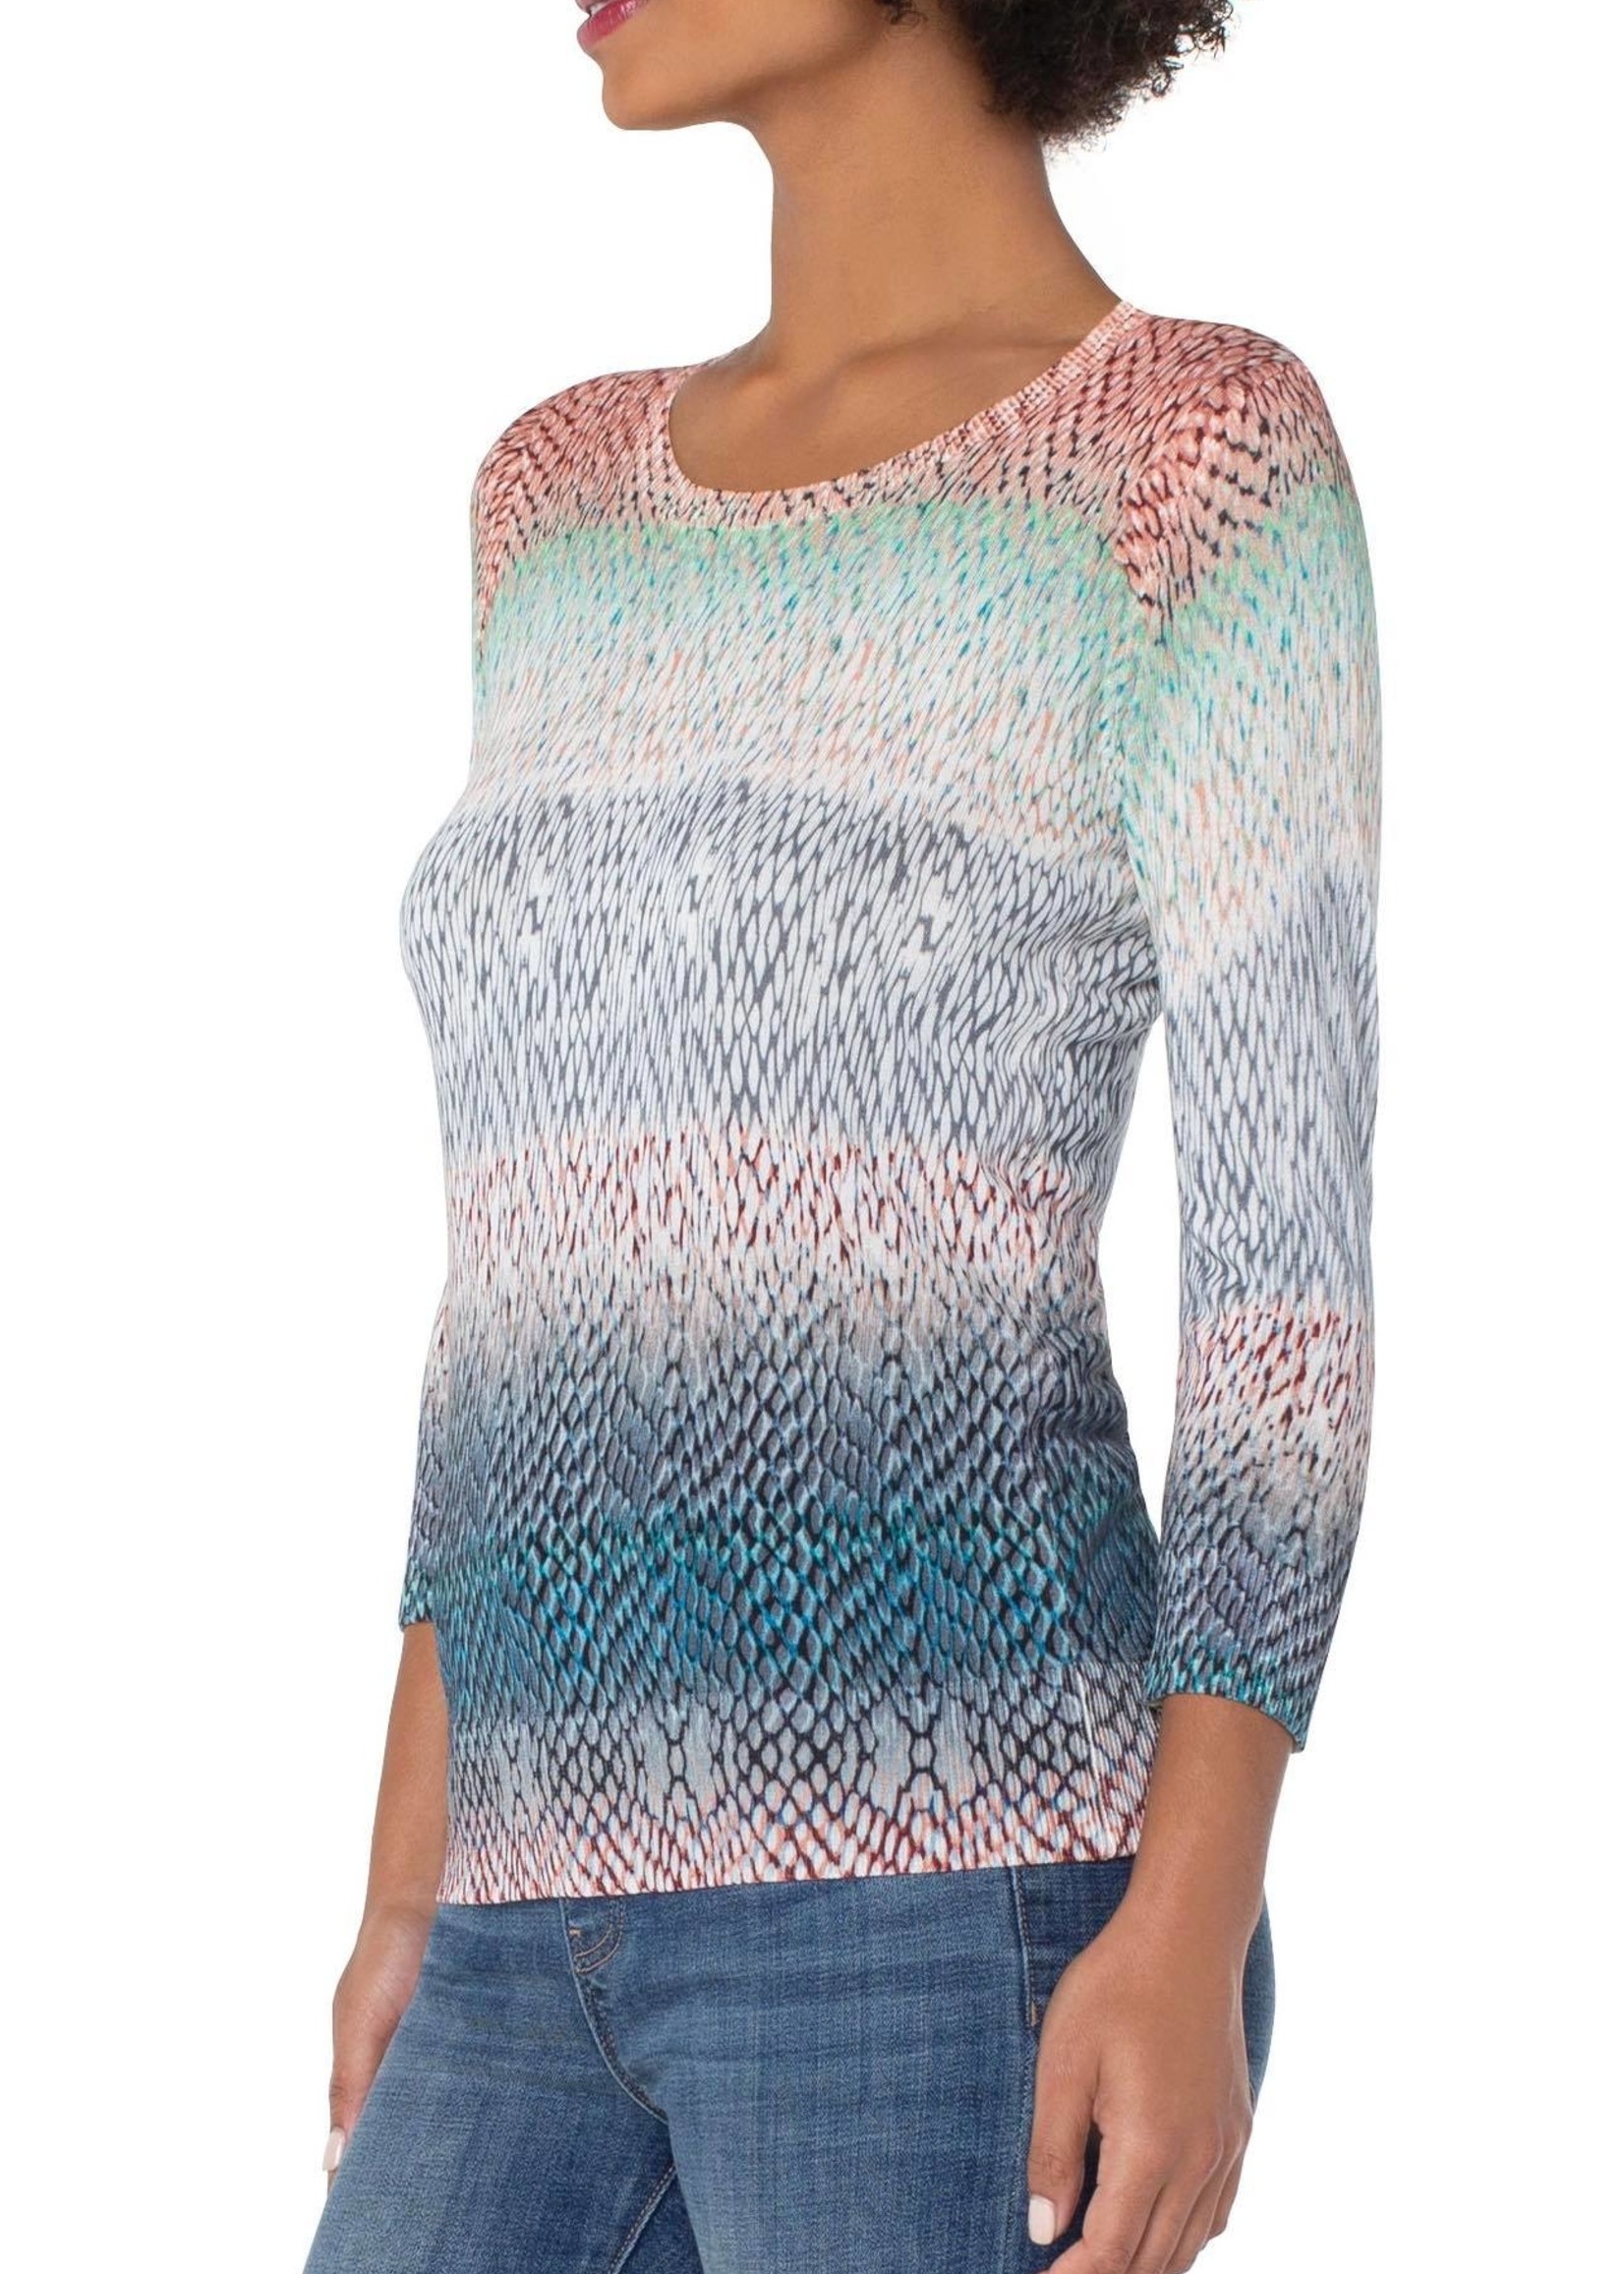 Liverpool Liverpool 3/4 sleeve sweater Ombre snake